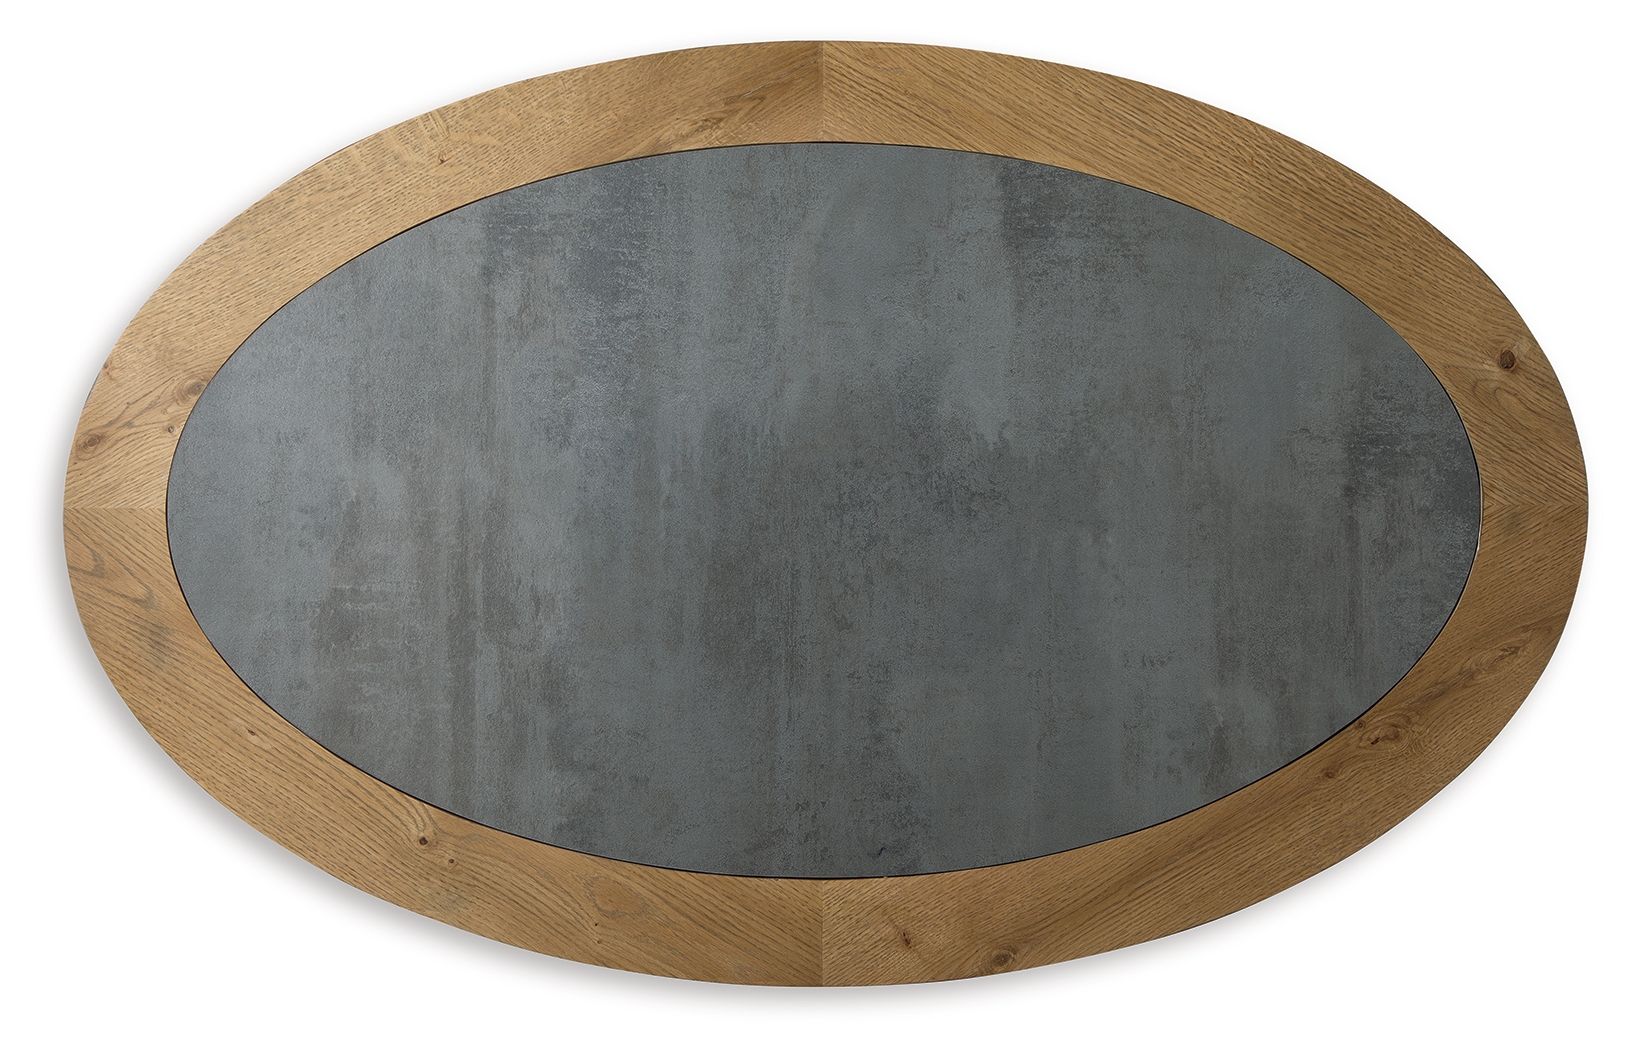 Brinstead - Light Brown - Oval Cocktail Table